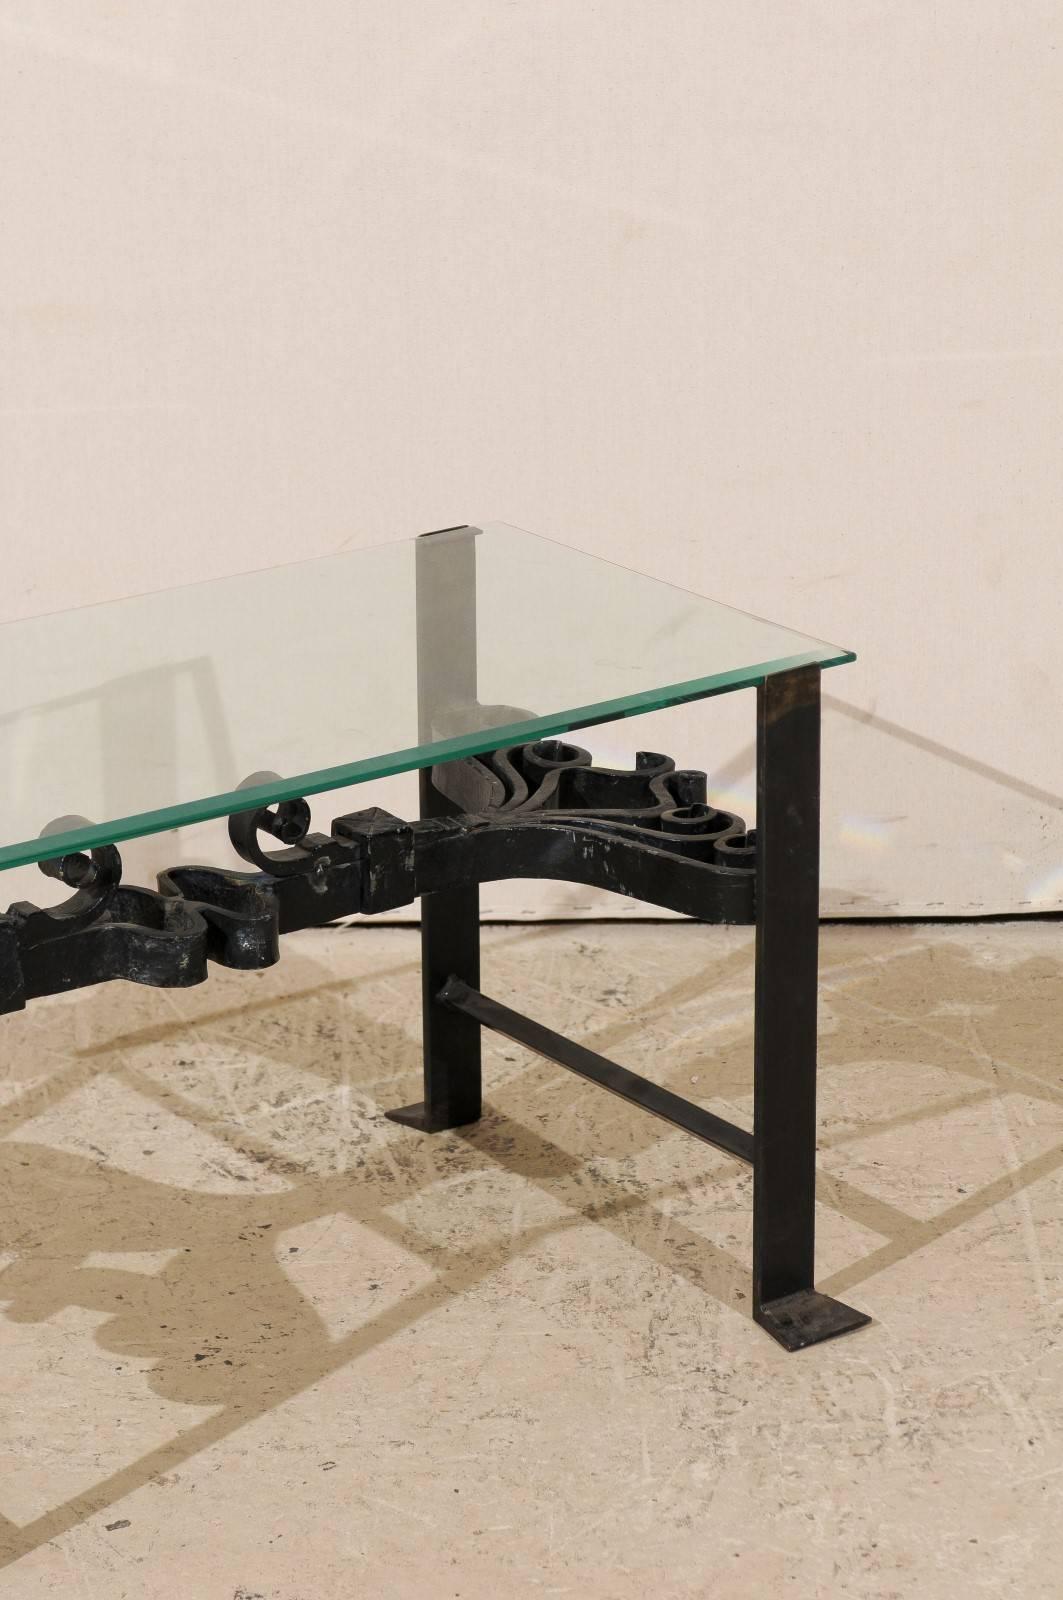 wrought iron table with glass top -china -b2b -forum -blog -wikipedia -.cn -.gov -alibaba